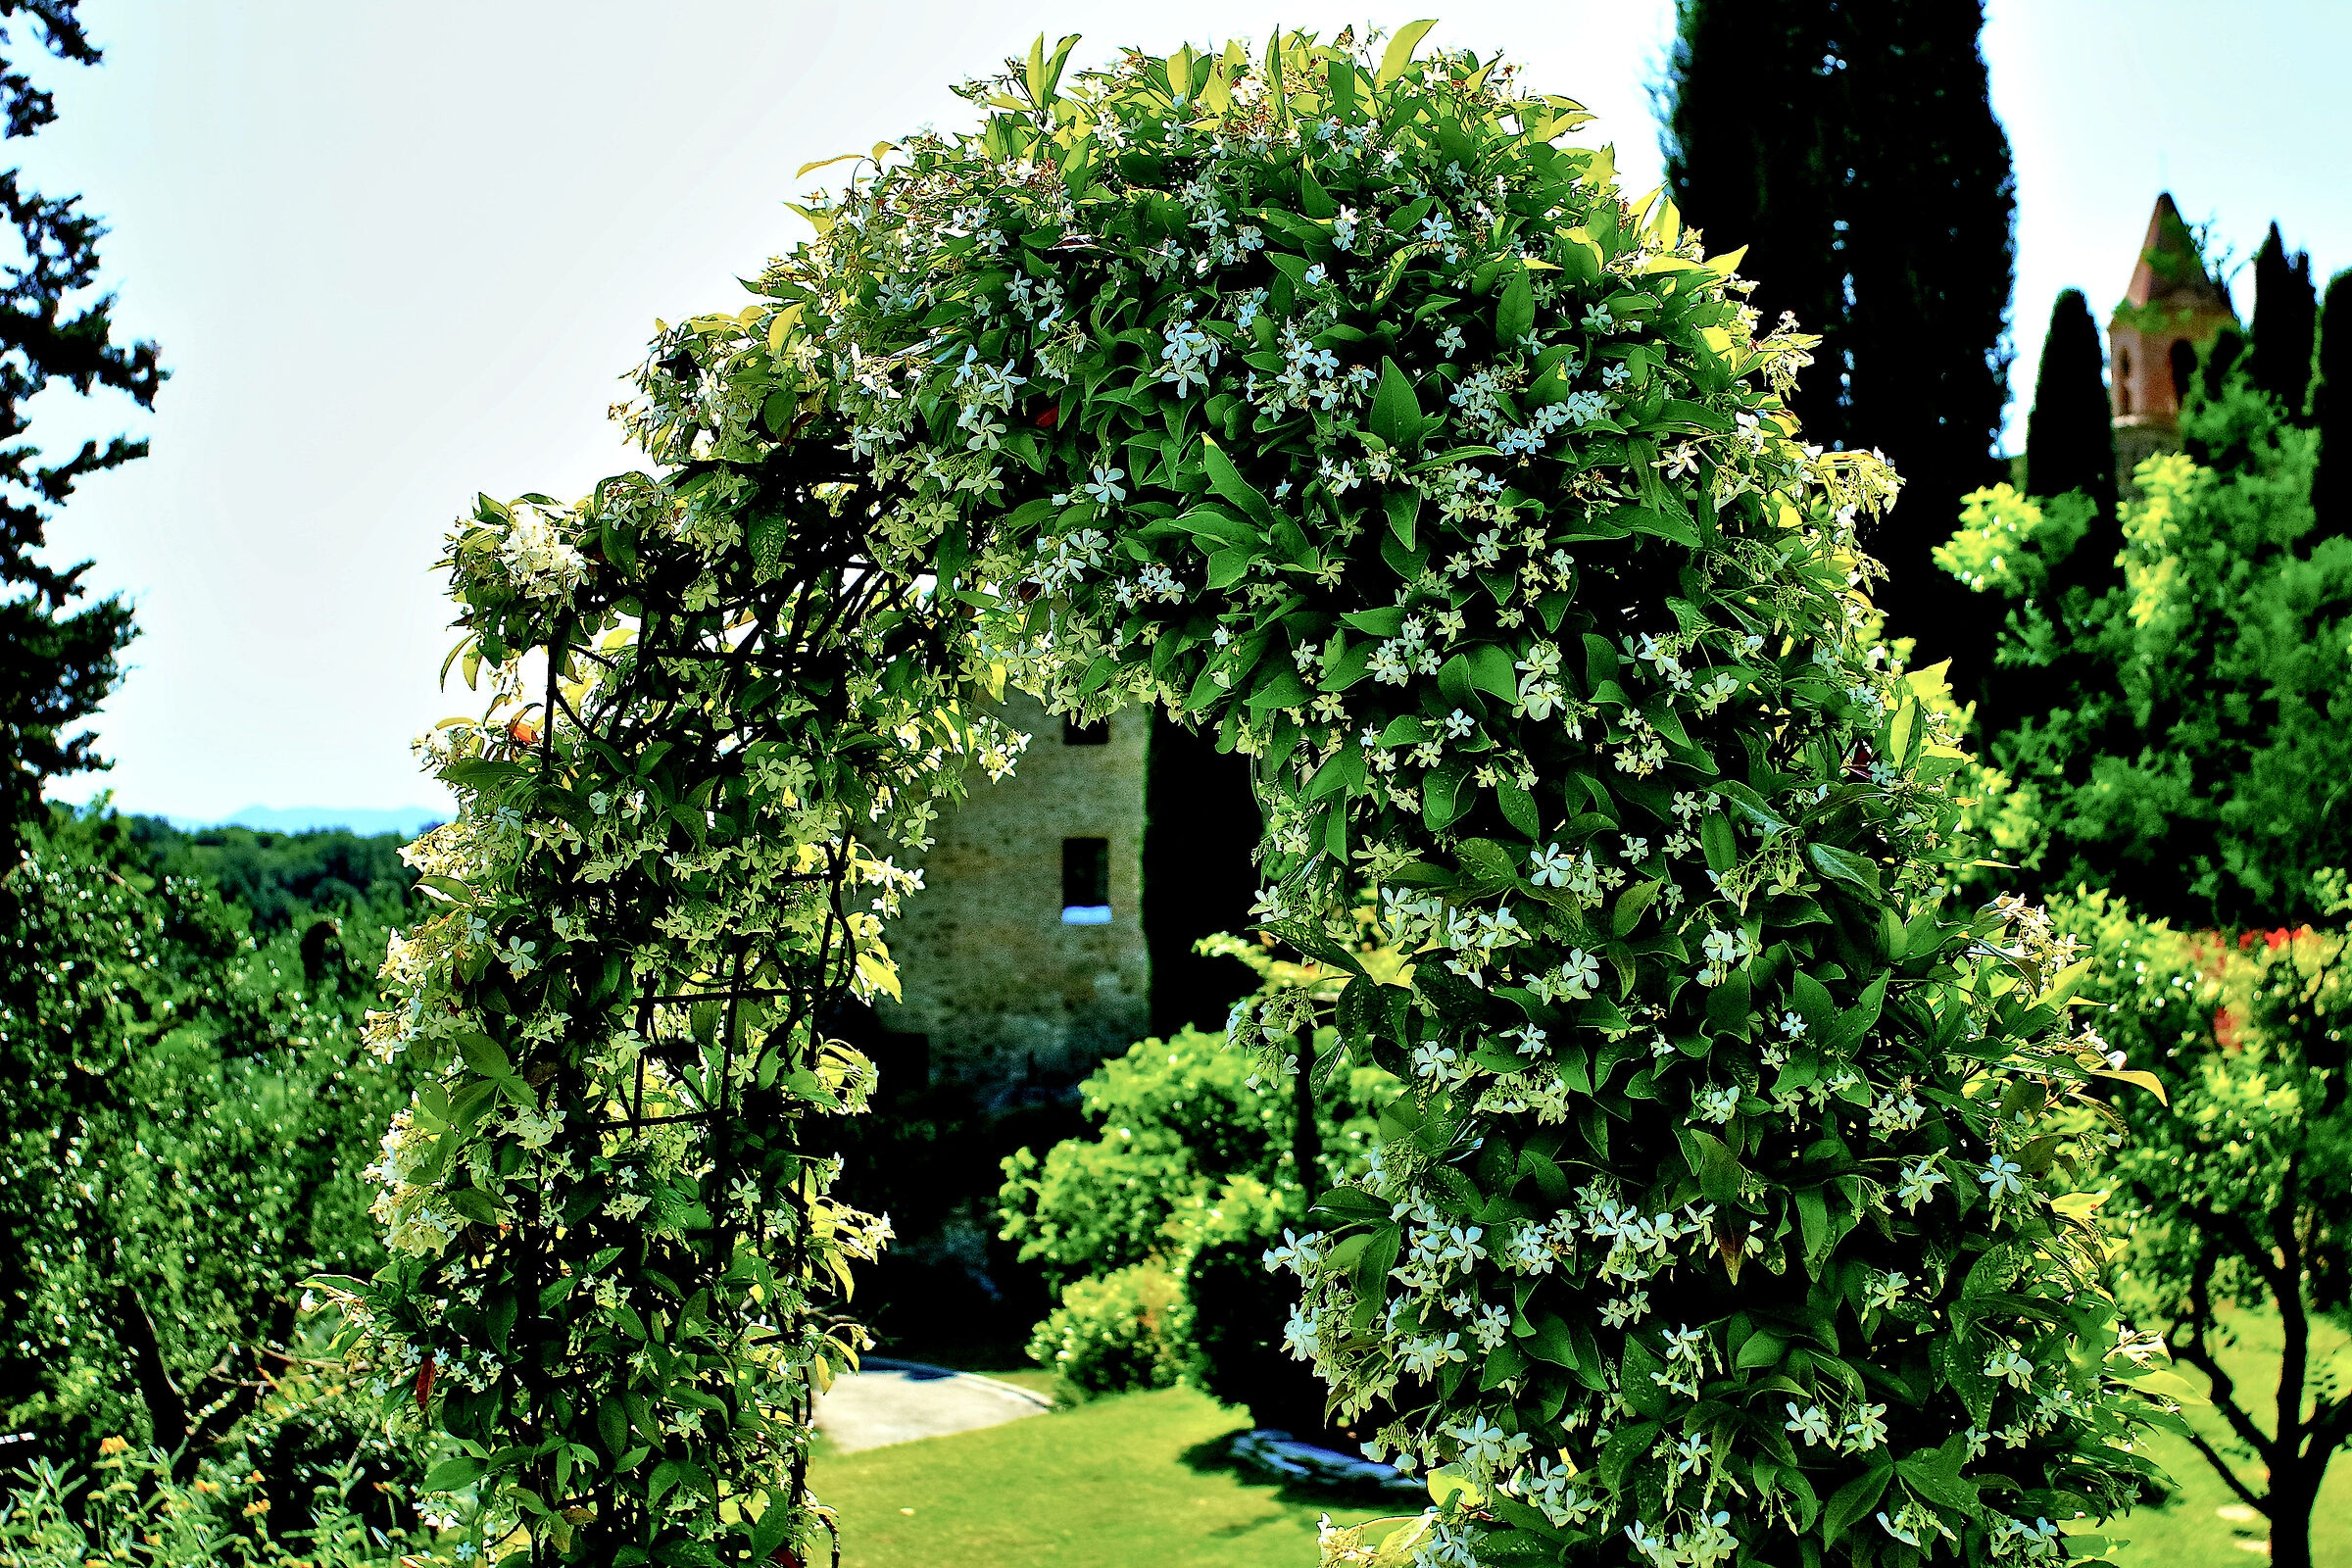 Floral composition (Garden of villa in Tuscany)...